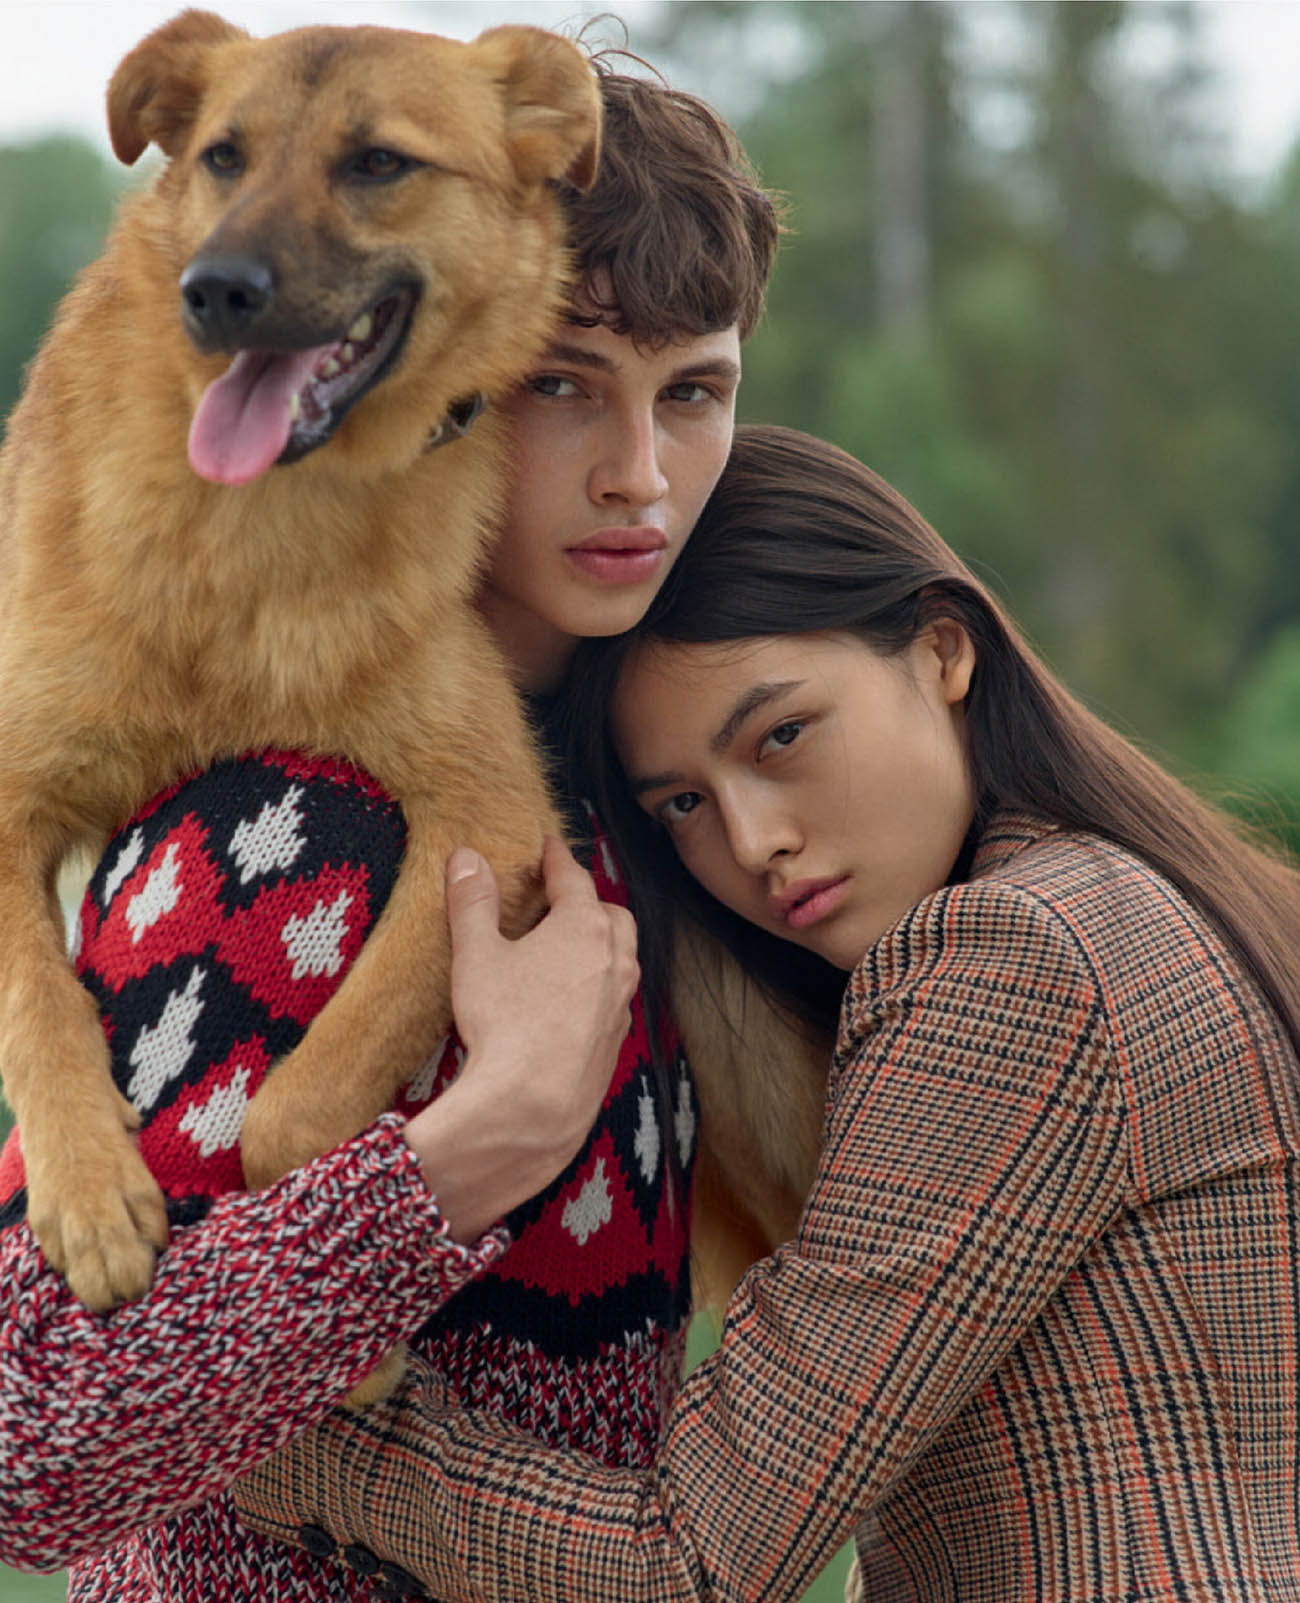 Misha Natali, Liza Han and Polina Levin by Arseny Jabiev for Vogue Russia August 2020